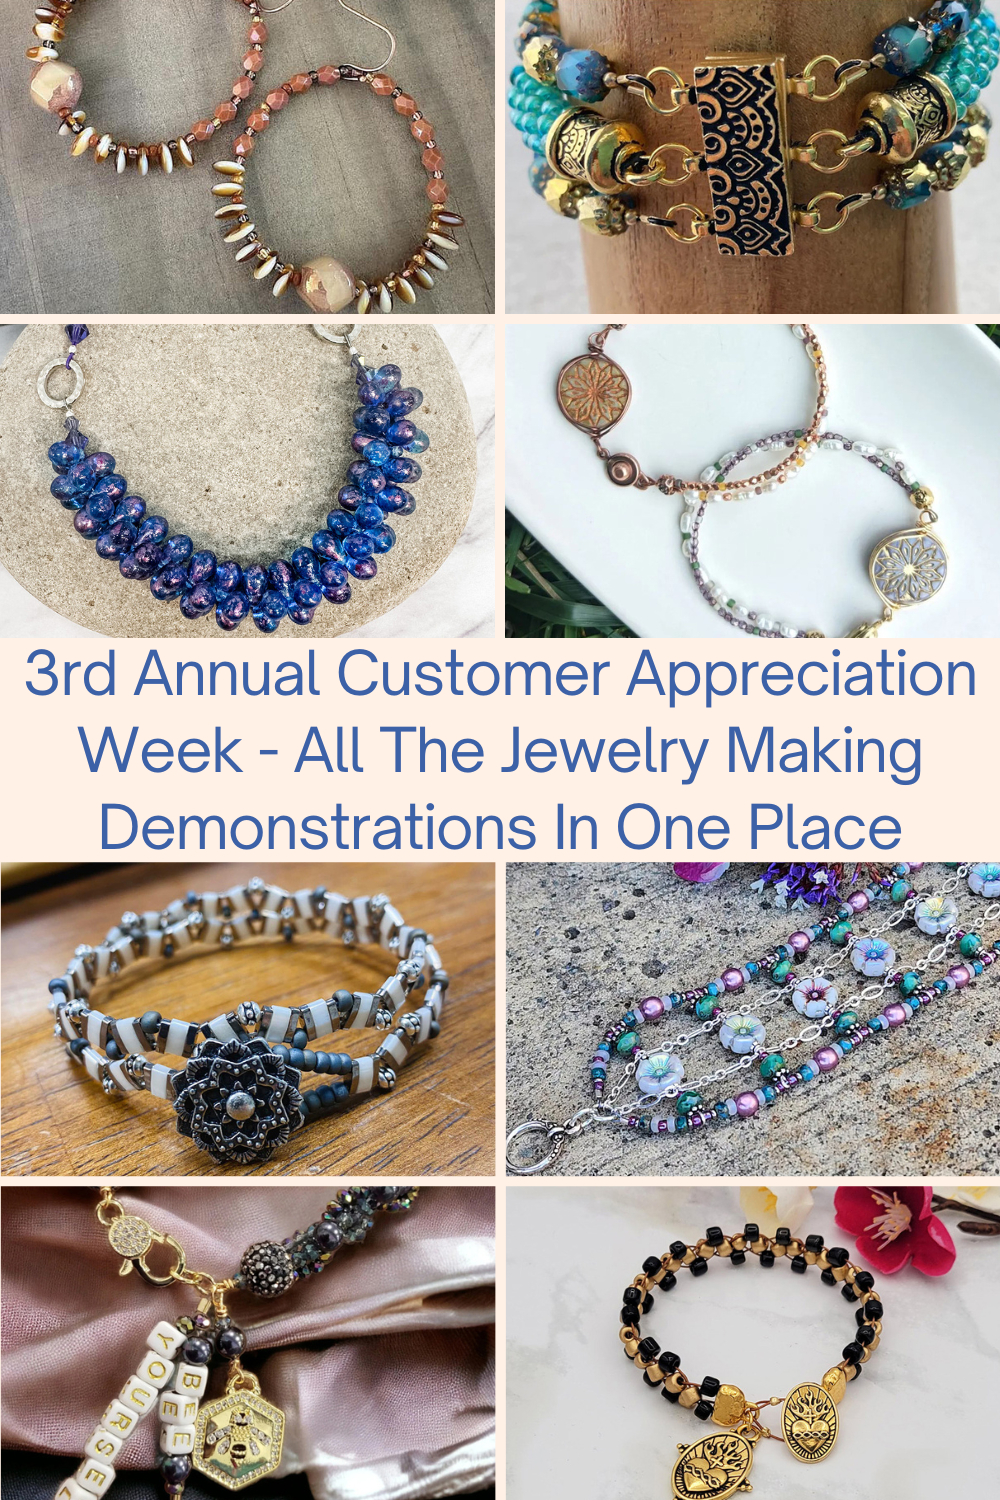 3rd Annual Customer Appreciation Week - All The Jewelry Making Demonstrations In One Place Collage